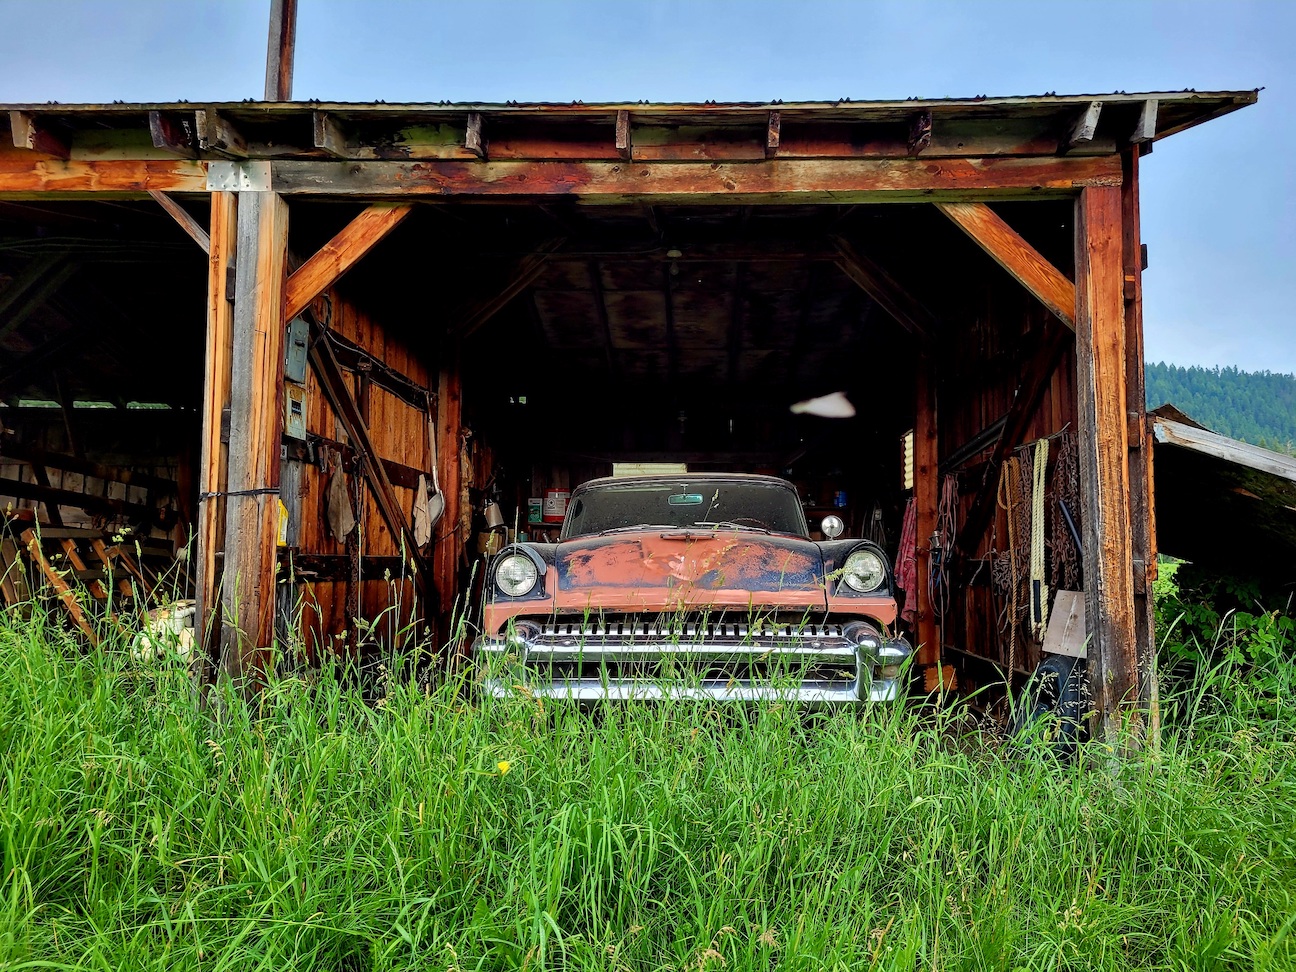 photo of a rusting car from the '50s in a wooden shed, surrounded by overgrown grass and rusting tools